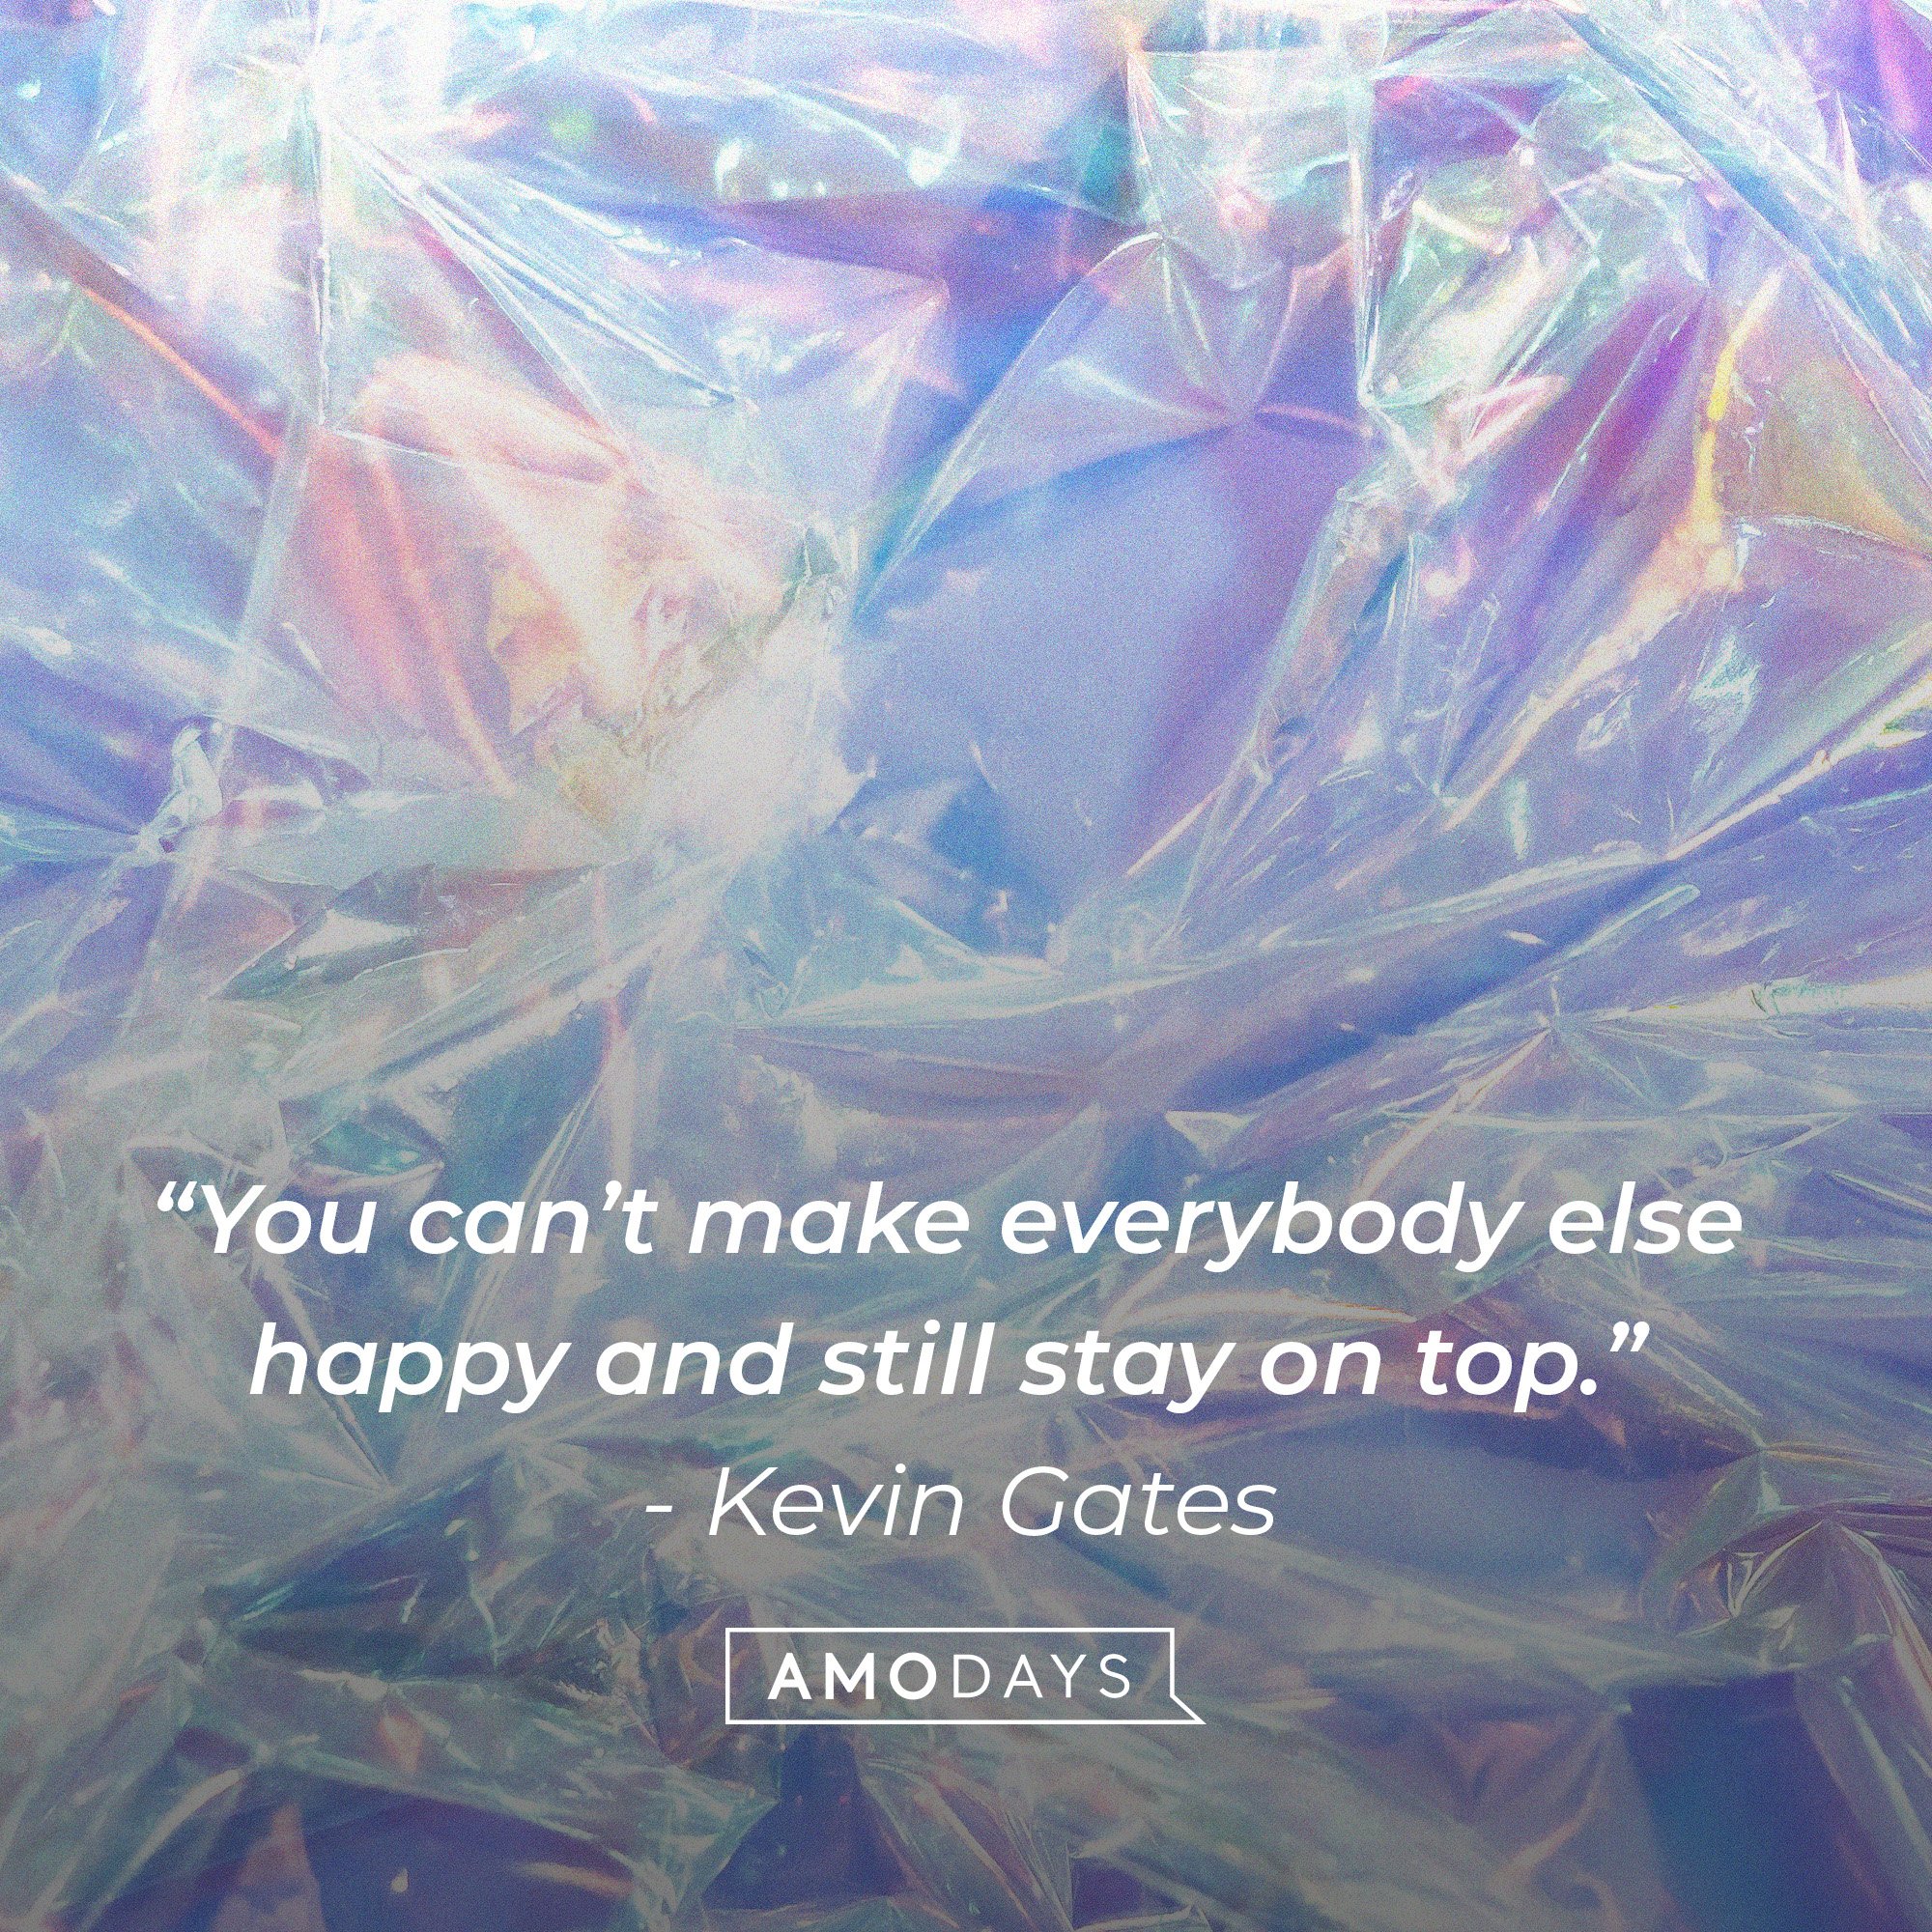 Kevin Gates’ quote: “You can’t make everybody else happy and still stay on top.” | Image: AmoDays 